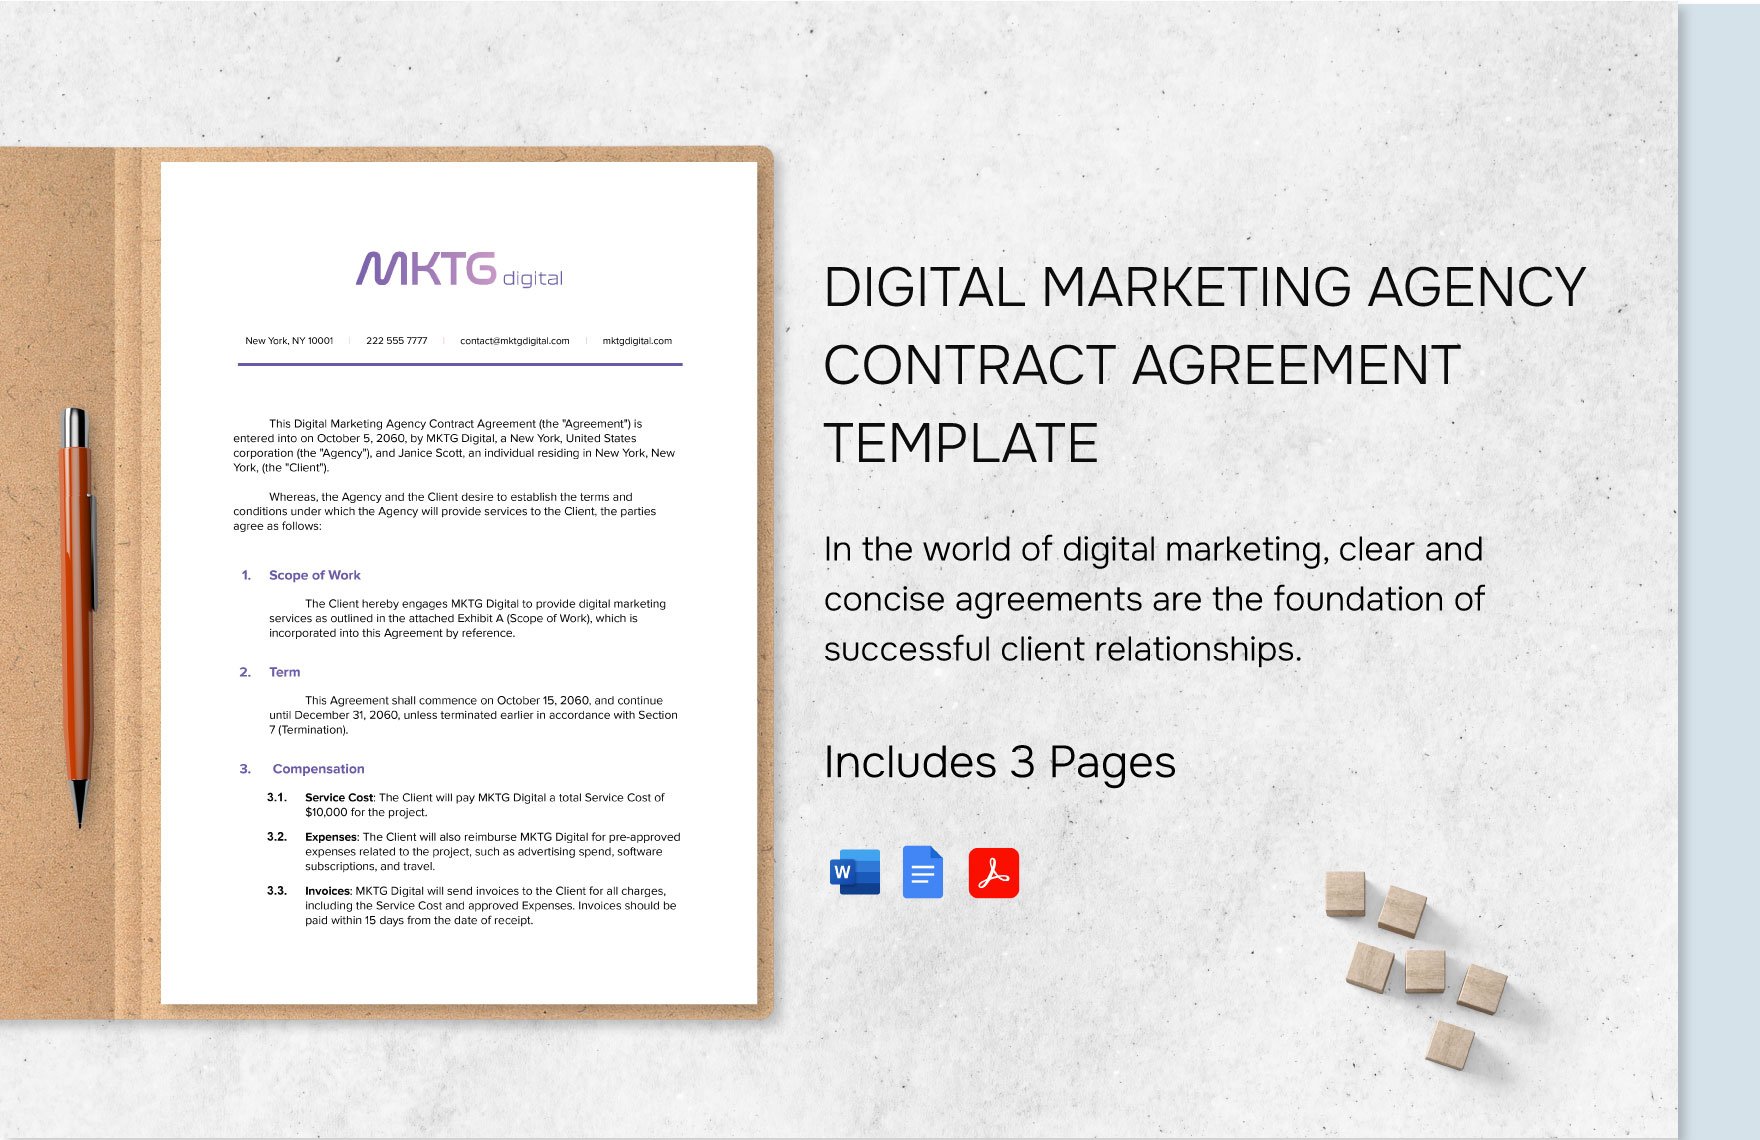 Digital Marketing Agency Contract Agreement Template in Word, Google Docs, PDF